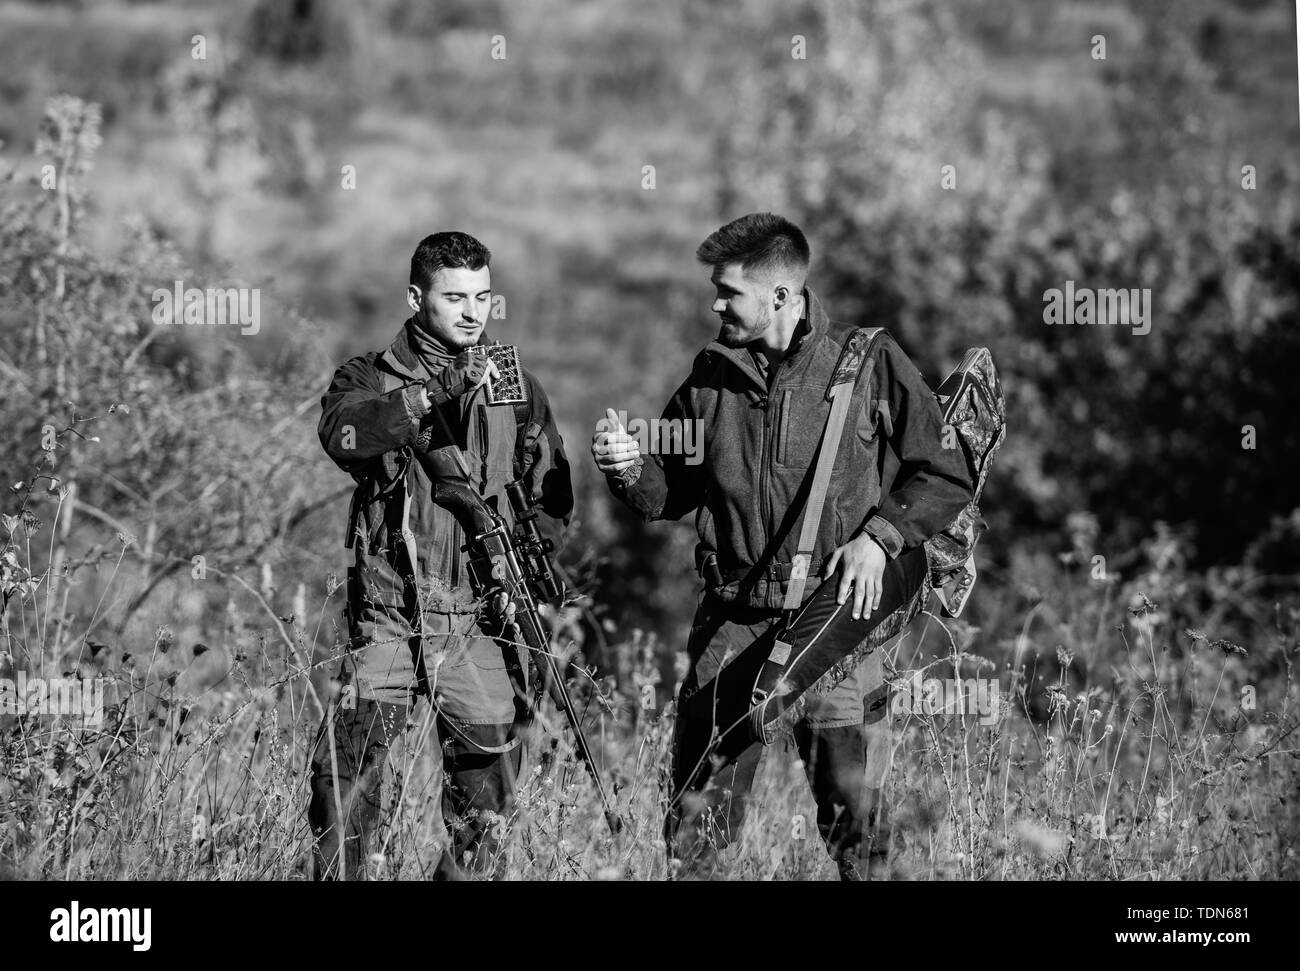 Army forces. Camouflage. Friendship of men hunters. Hunting skills and weapon equipment. How turn hunting into hobby. Military uniform. Man hunters with rifle gun. Boot camp. Hunters gamekeepers. Stock Photo